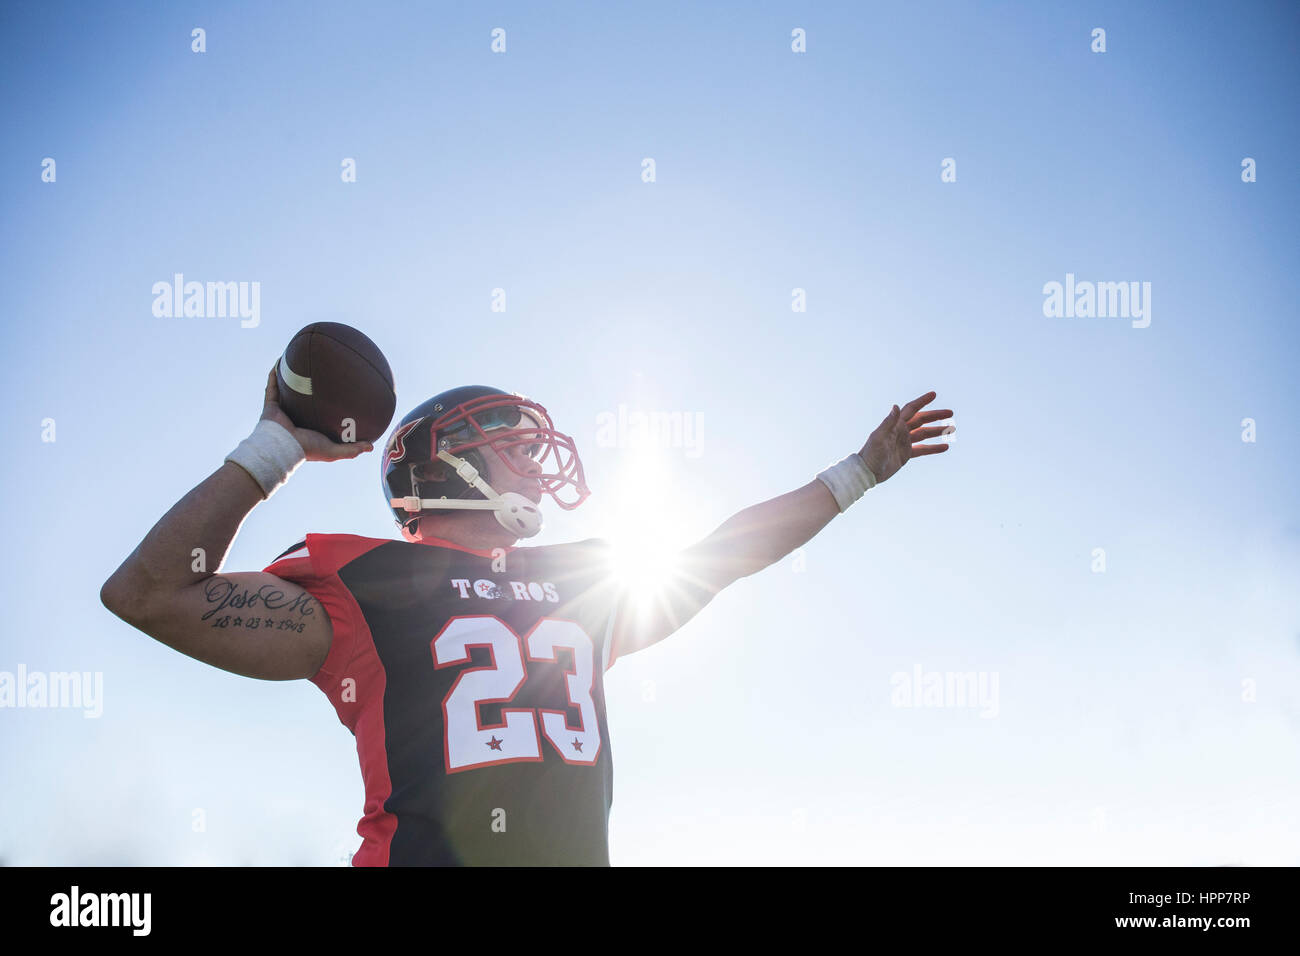 American football player throwing the ball during a match Stock Photo